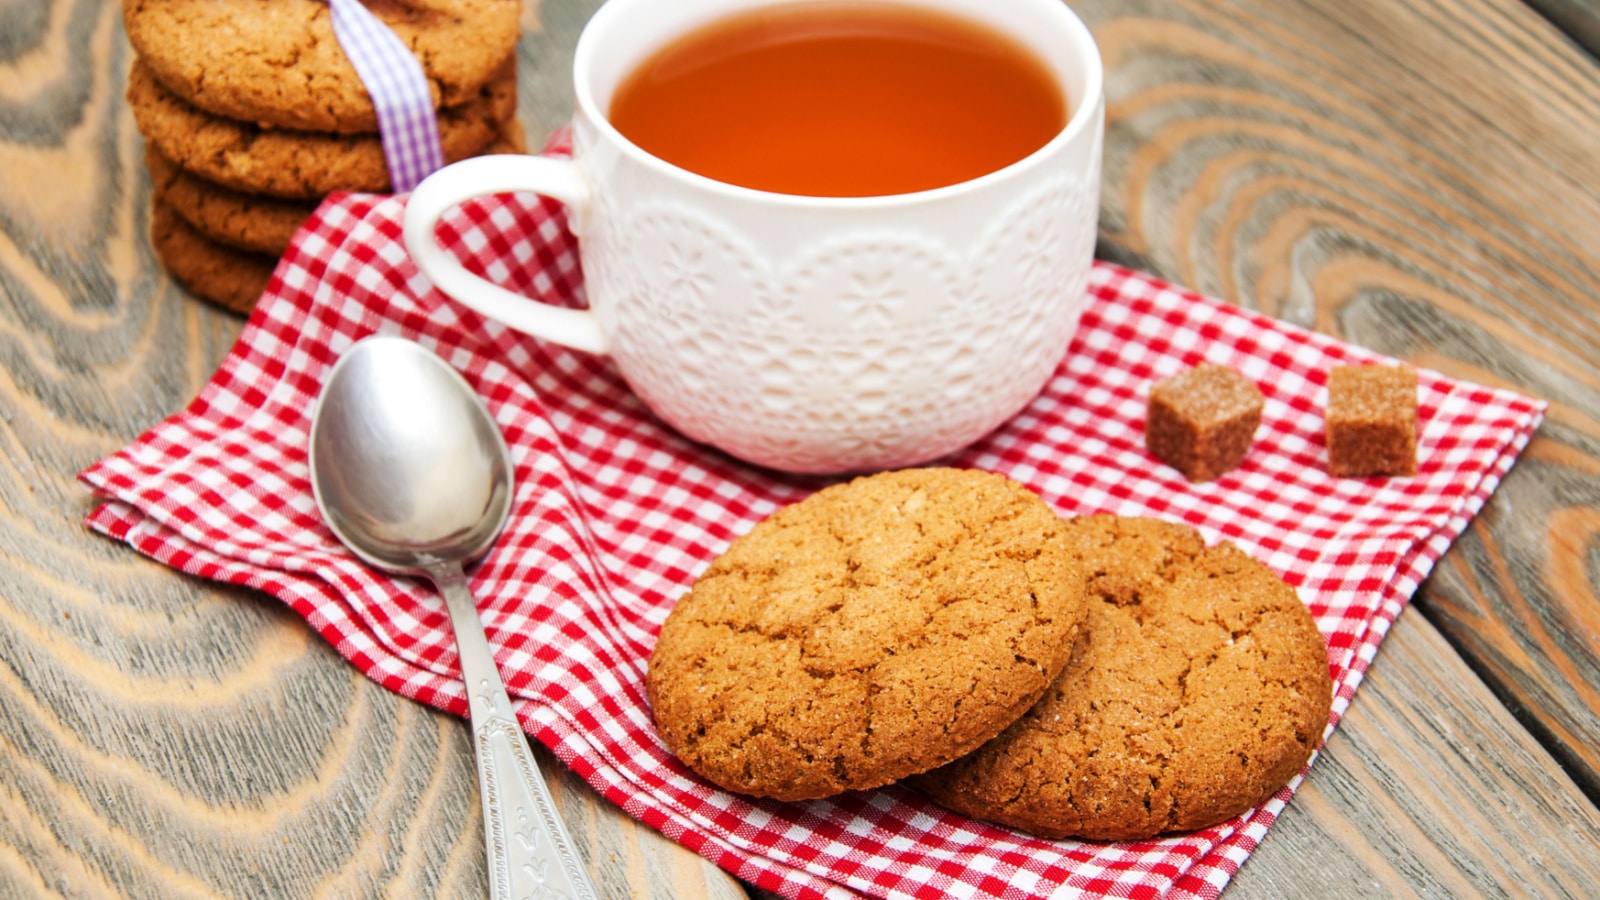 Cup of tea with oatmeal cookies on a wooden background